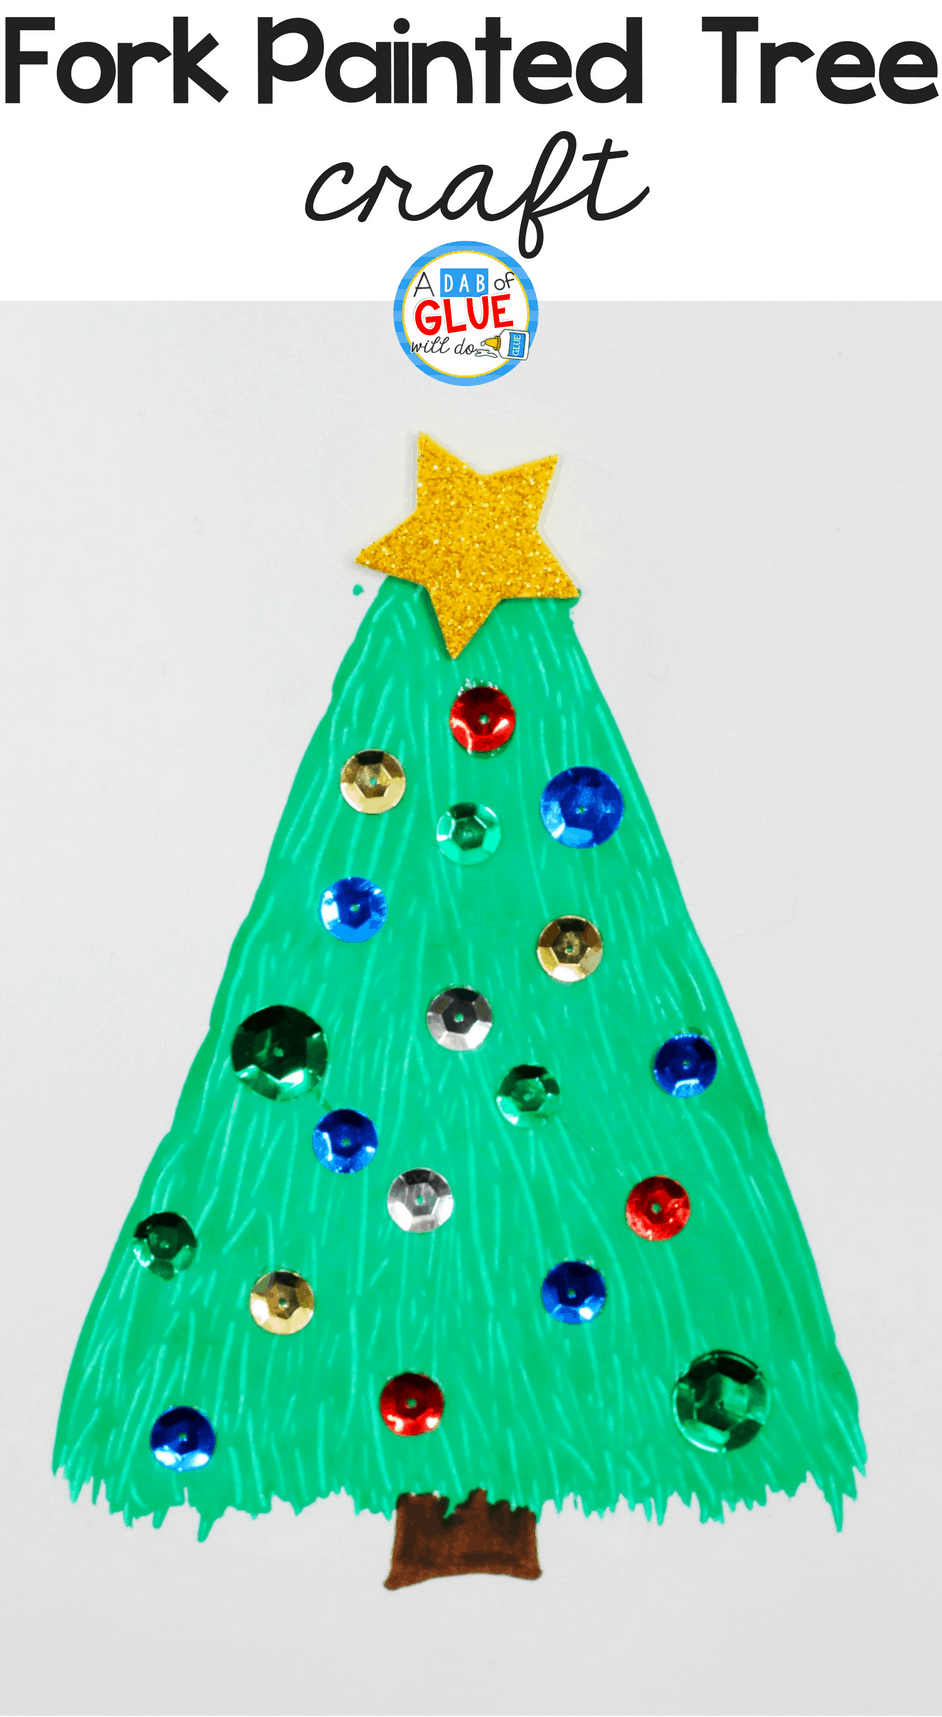 Fork painted Christmas art projects for preschoolers